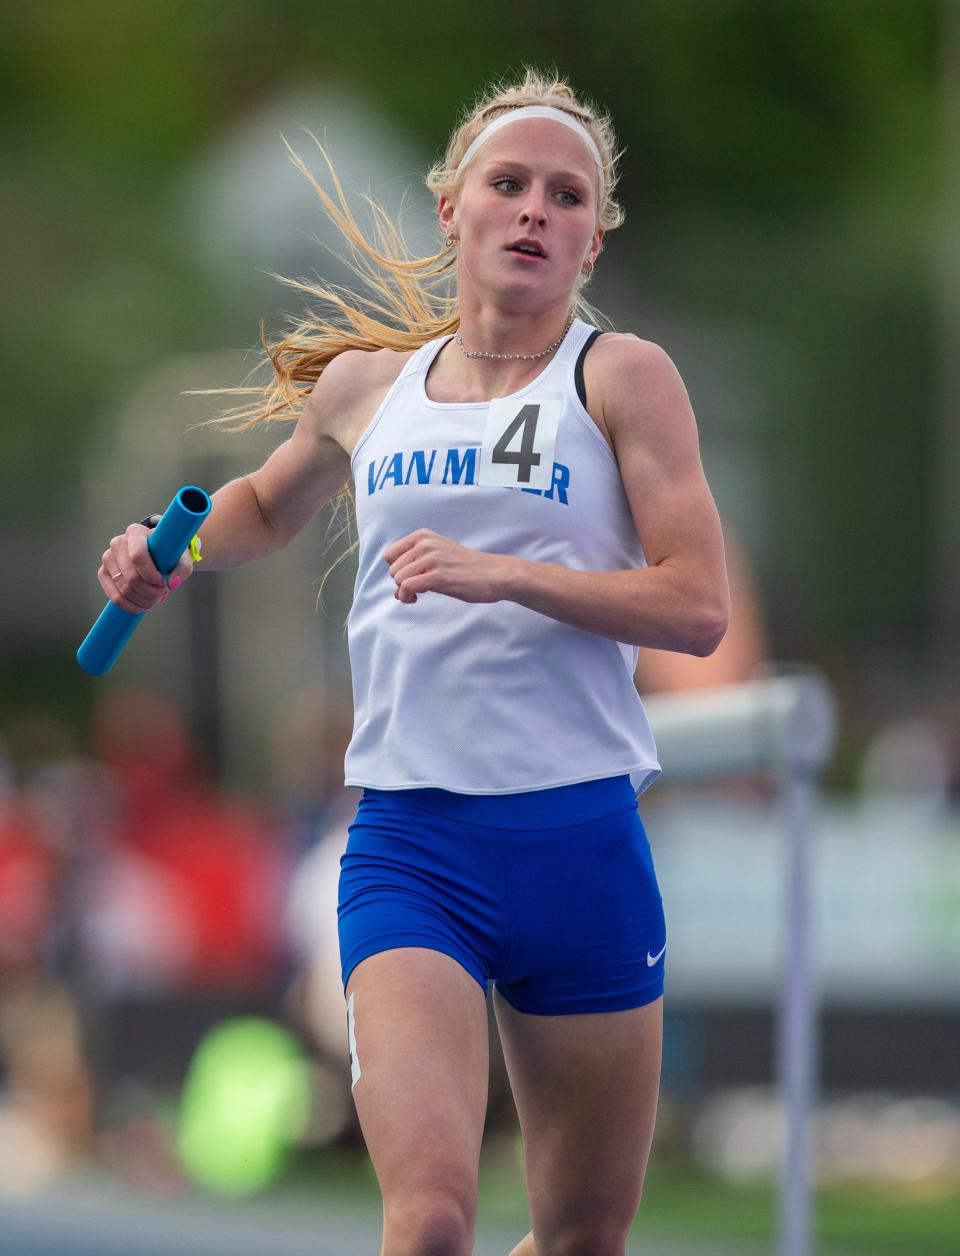 Van Meter's Clare Kelly competes in the 4x400 during the 2022 Iowa high school track and field state championships on May 20.